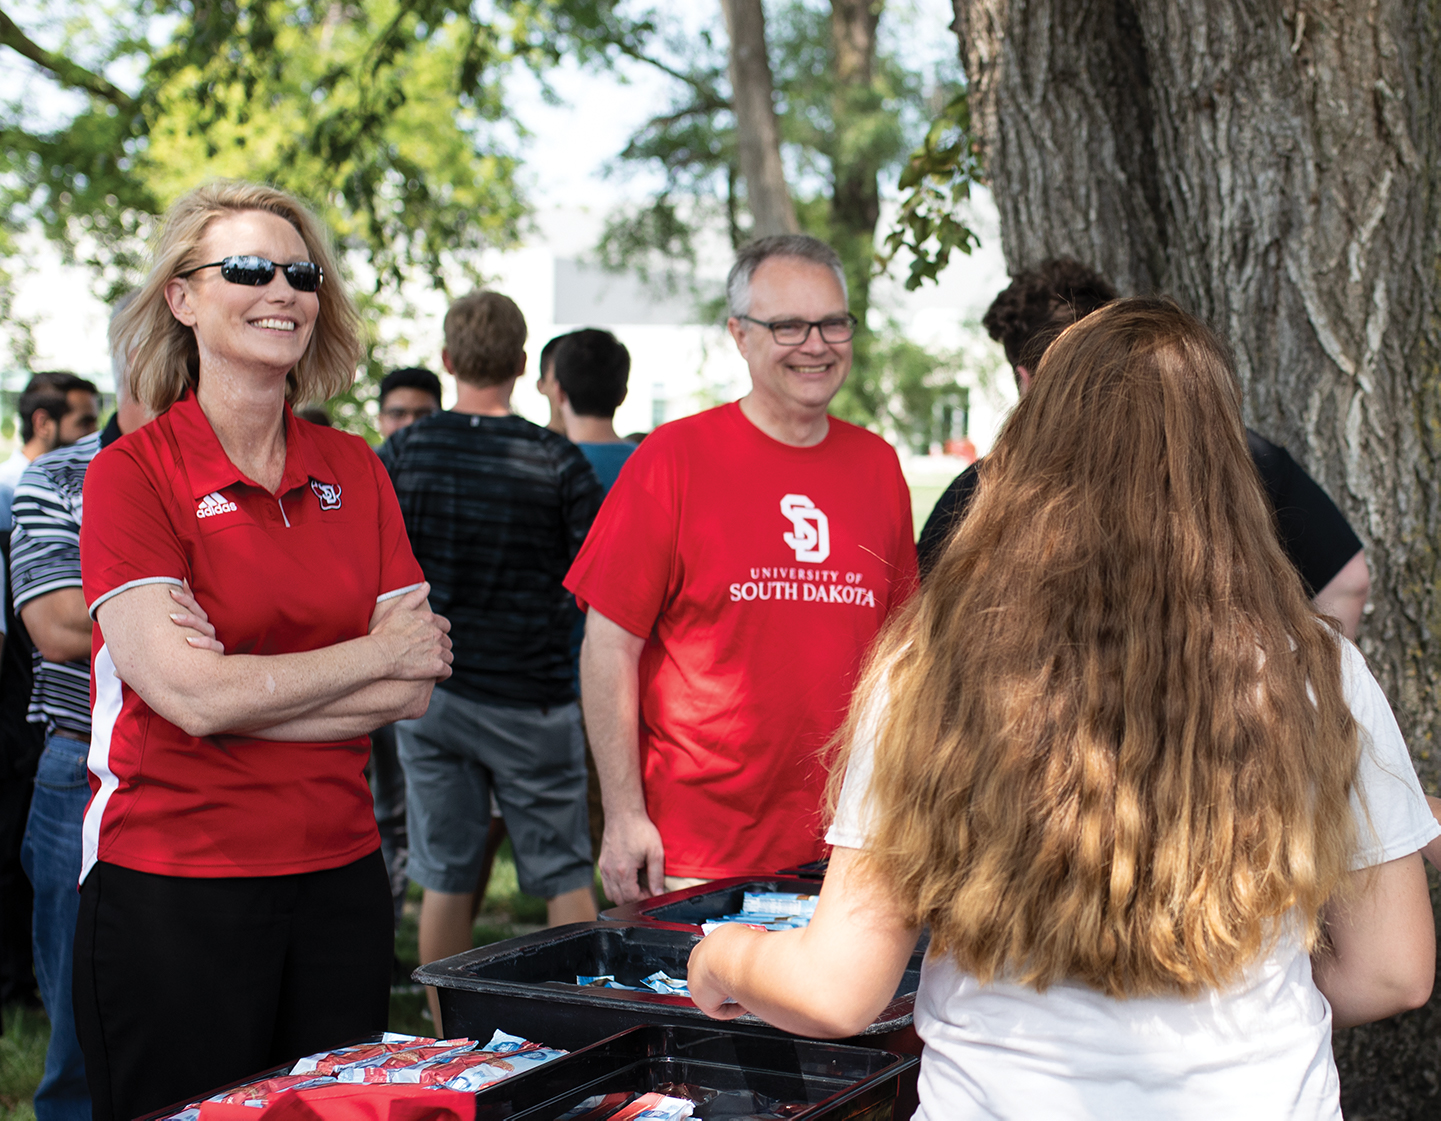 President Gestring prepares for first year in office, welcomes students